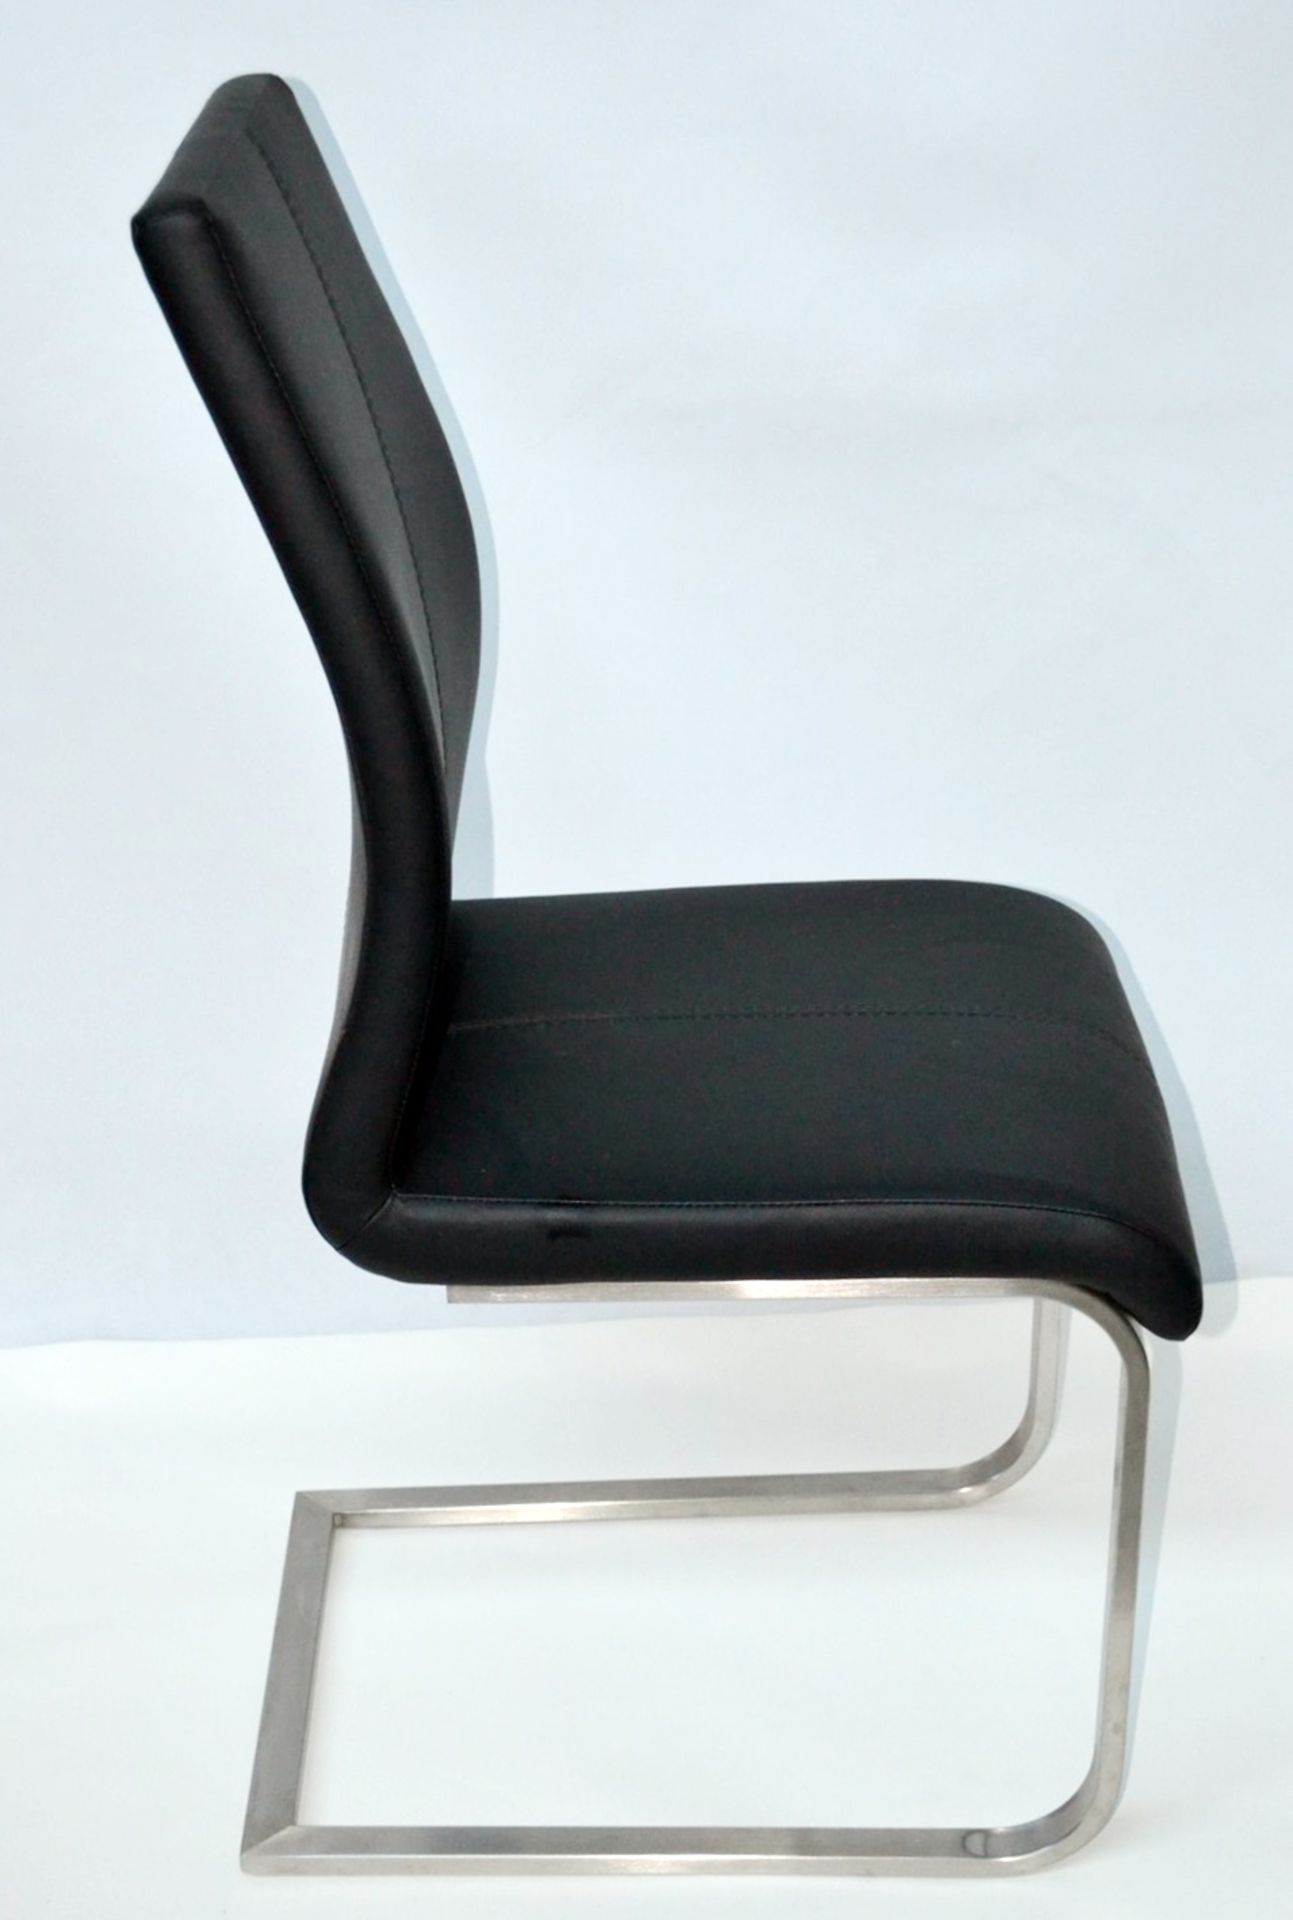 4 x Black Soft Leather Dining Chairs - Featuring A Curved Ergonomic Design With Metal Cantilever Bas